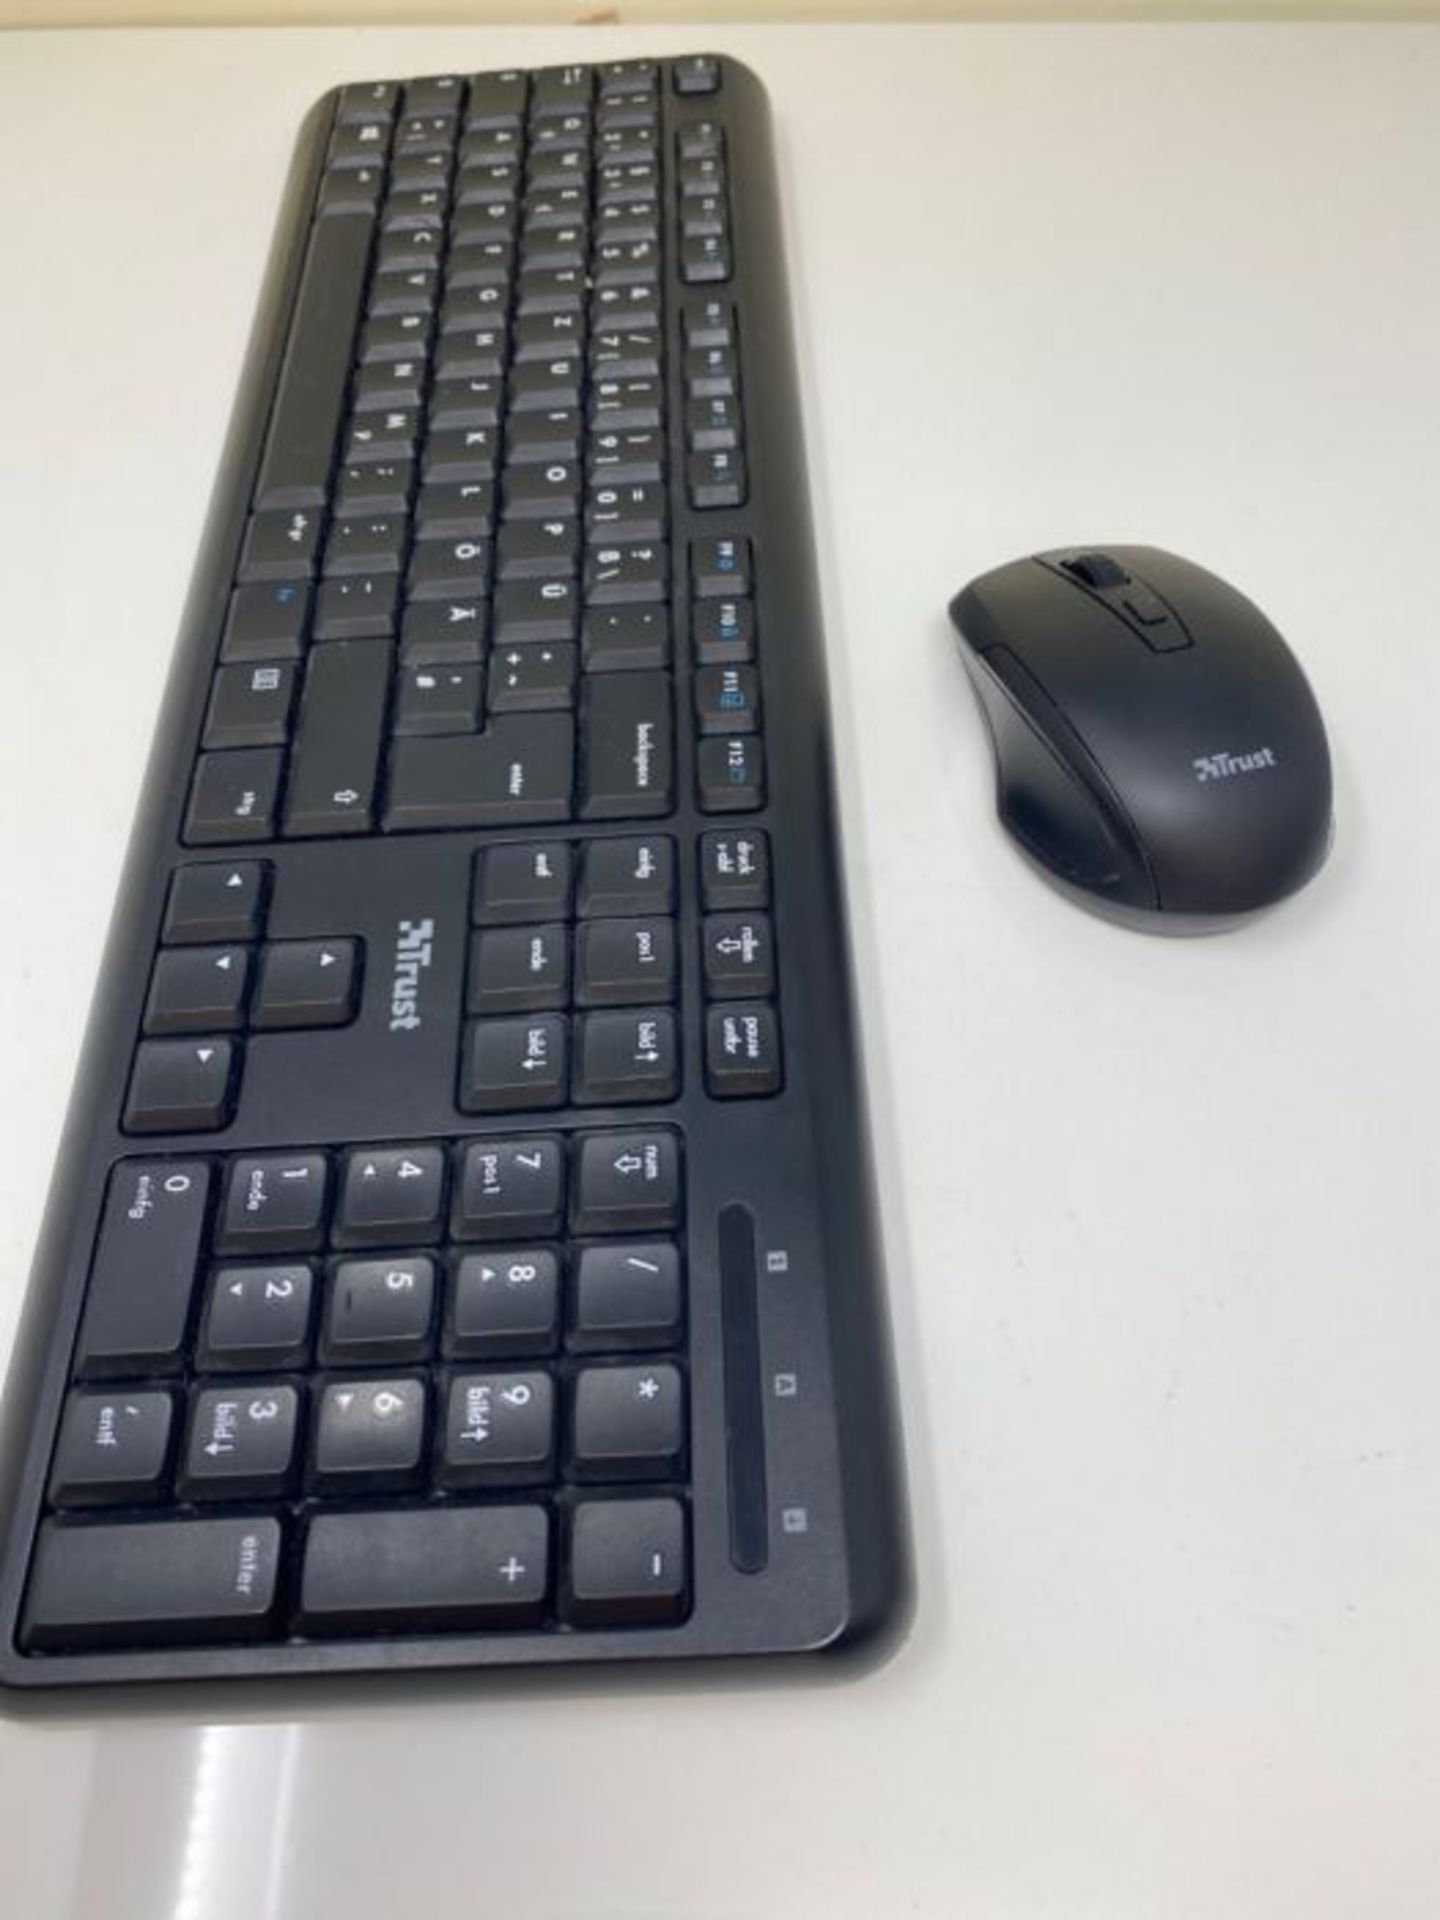 Trust 24080 Ymo Wireless Keyboard Mouse Set - German QWERTZ Layout, Quiet Keys and Mou - Image 2 of 2